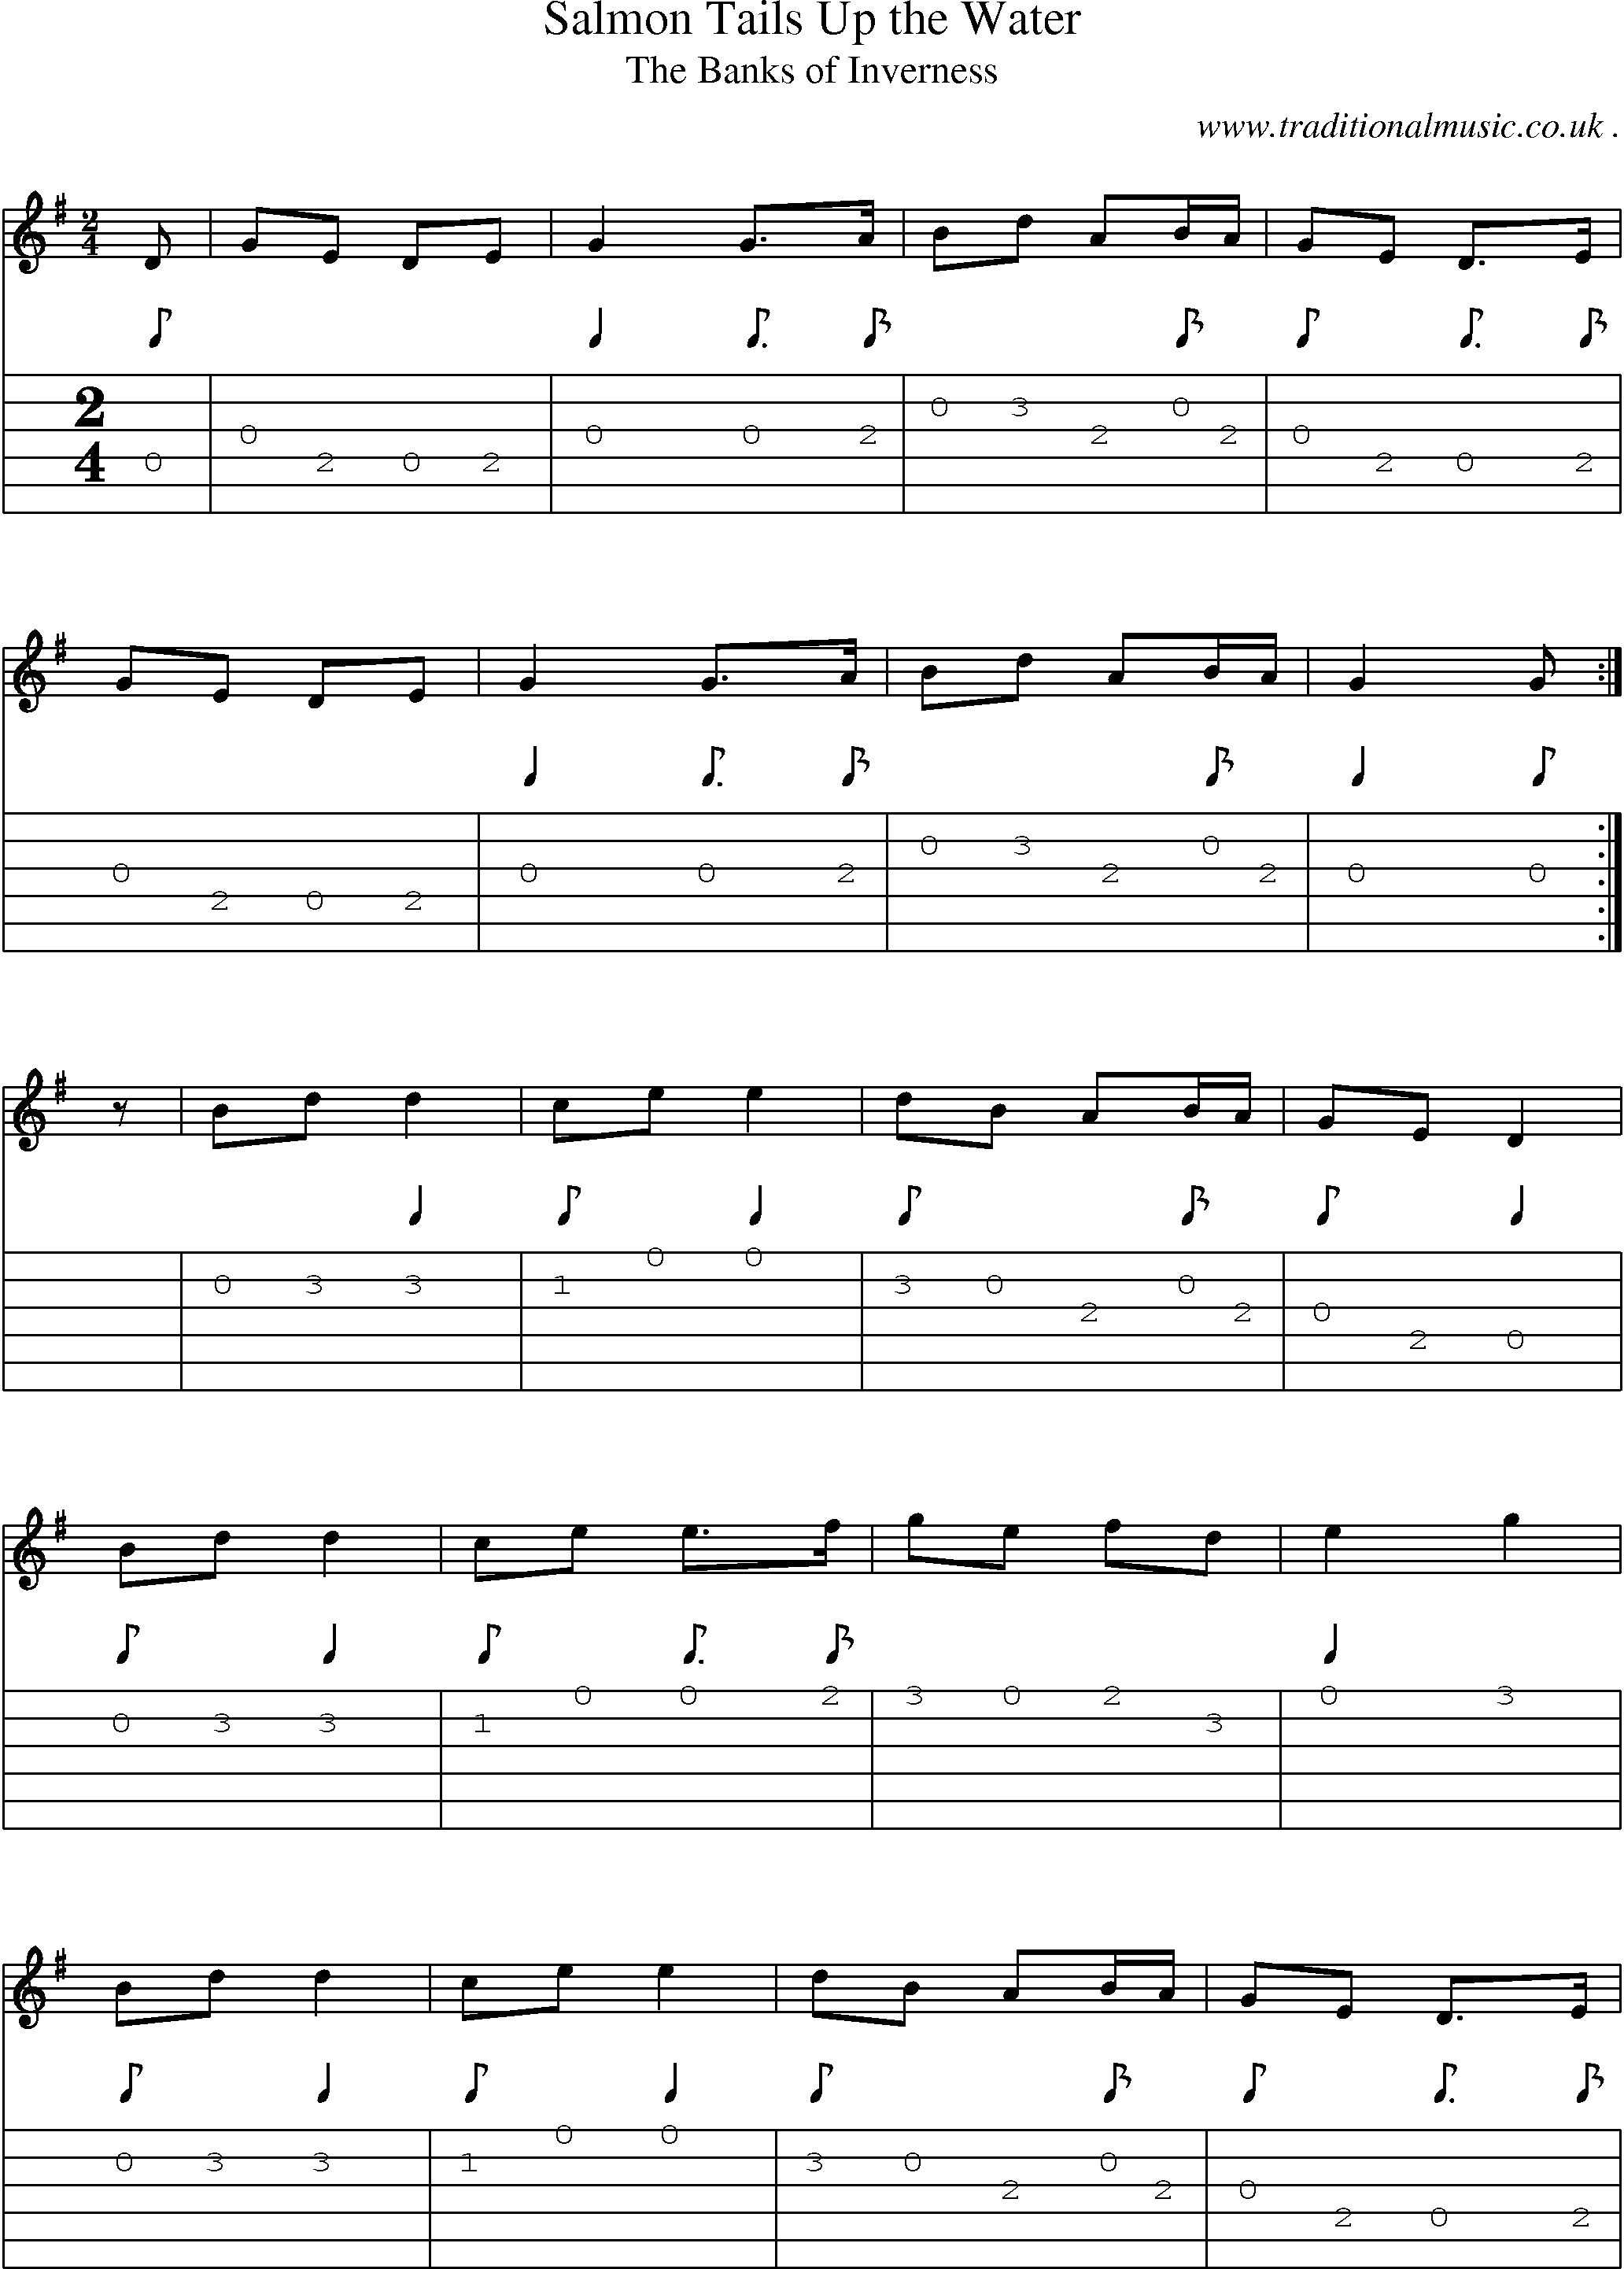 Sheet-music  score, Chords and Guitar Tabs for Salmon Tails Up The Water